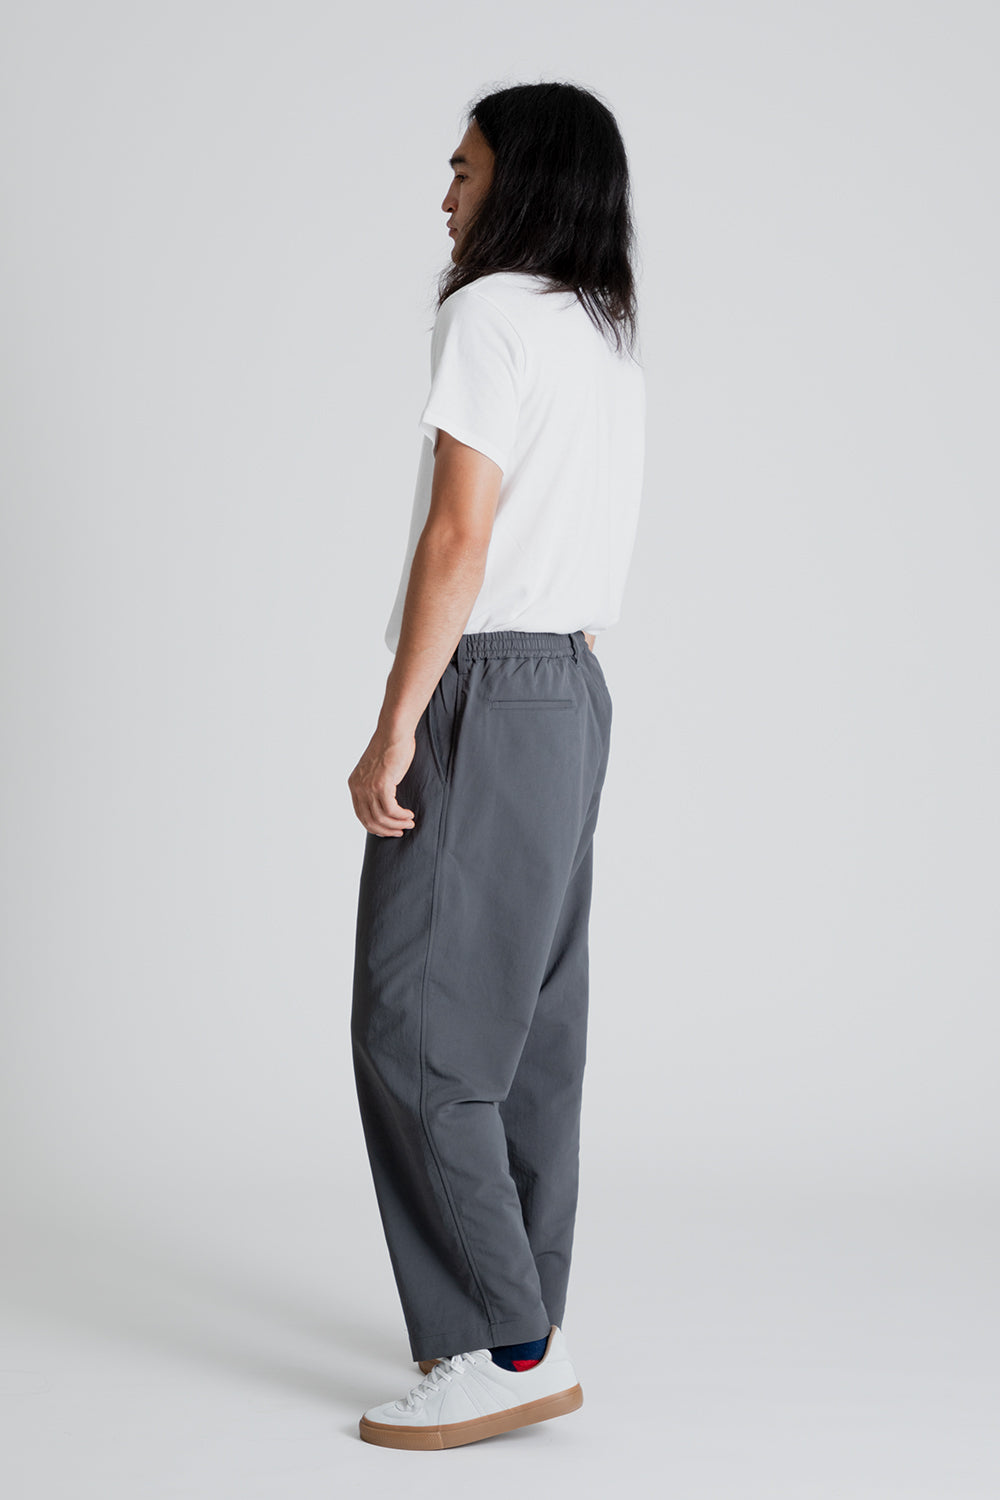 Nanamica ALPHADRY Wide Easy Pants in Gray